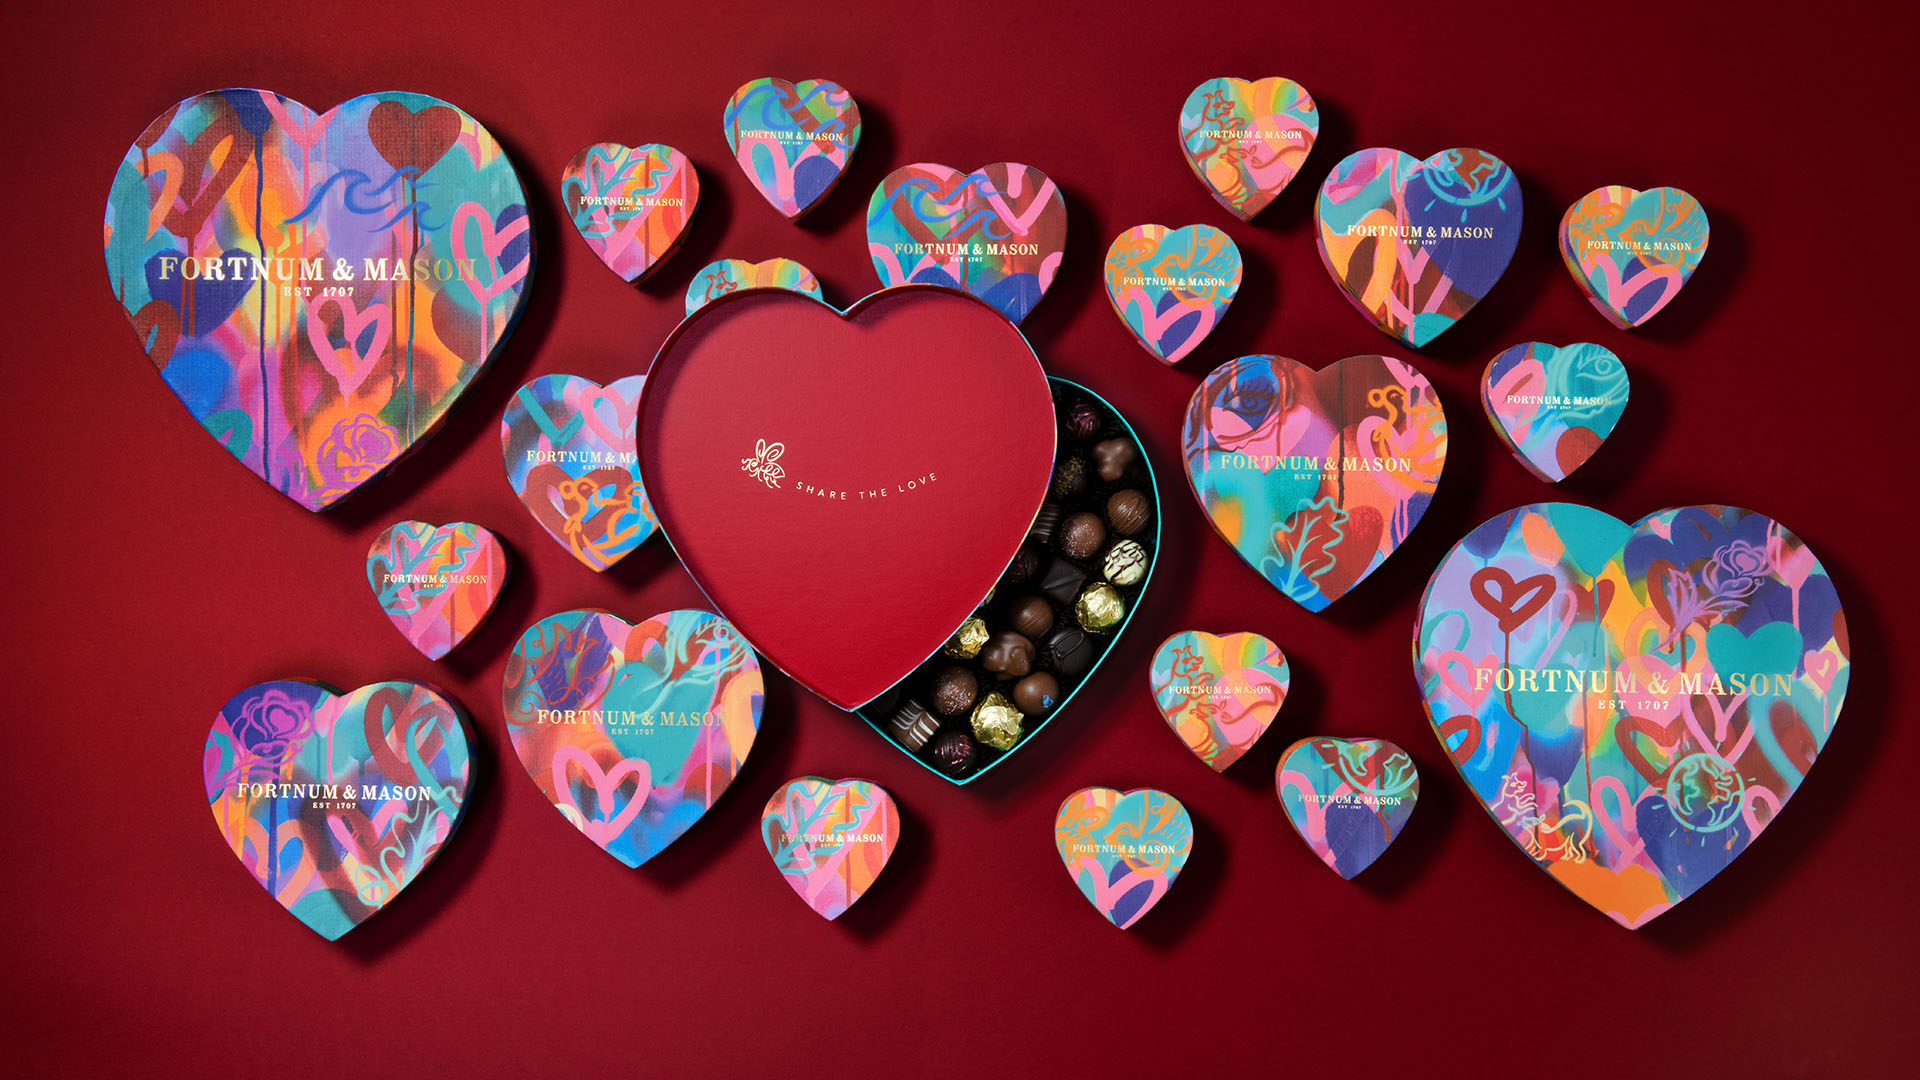 Unleash the Love: Fortnum & Mason’s Limited Edition Valentine’s Range Celebrates the Beauty in All Forms of Love